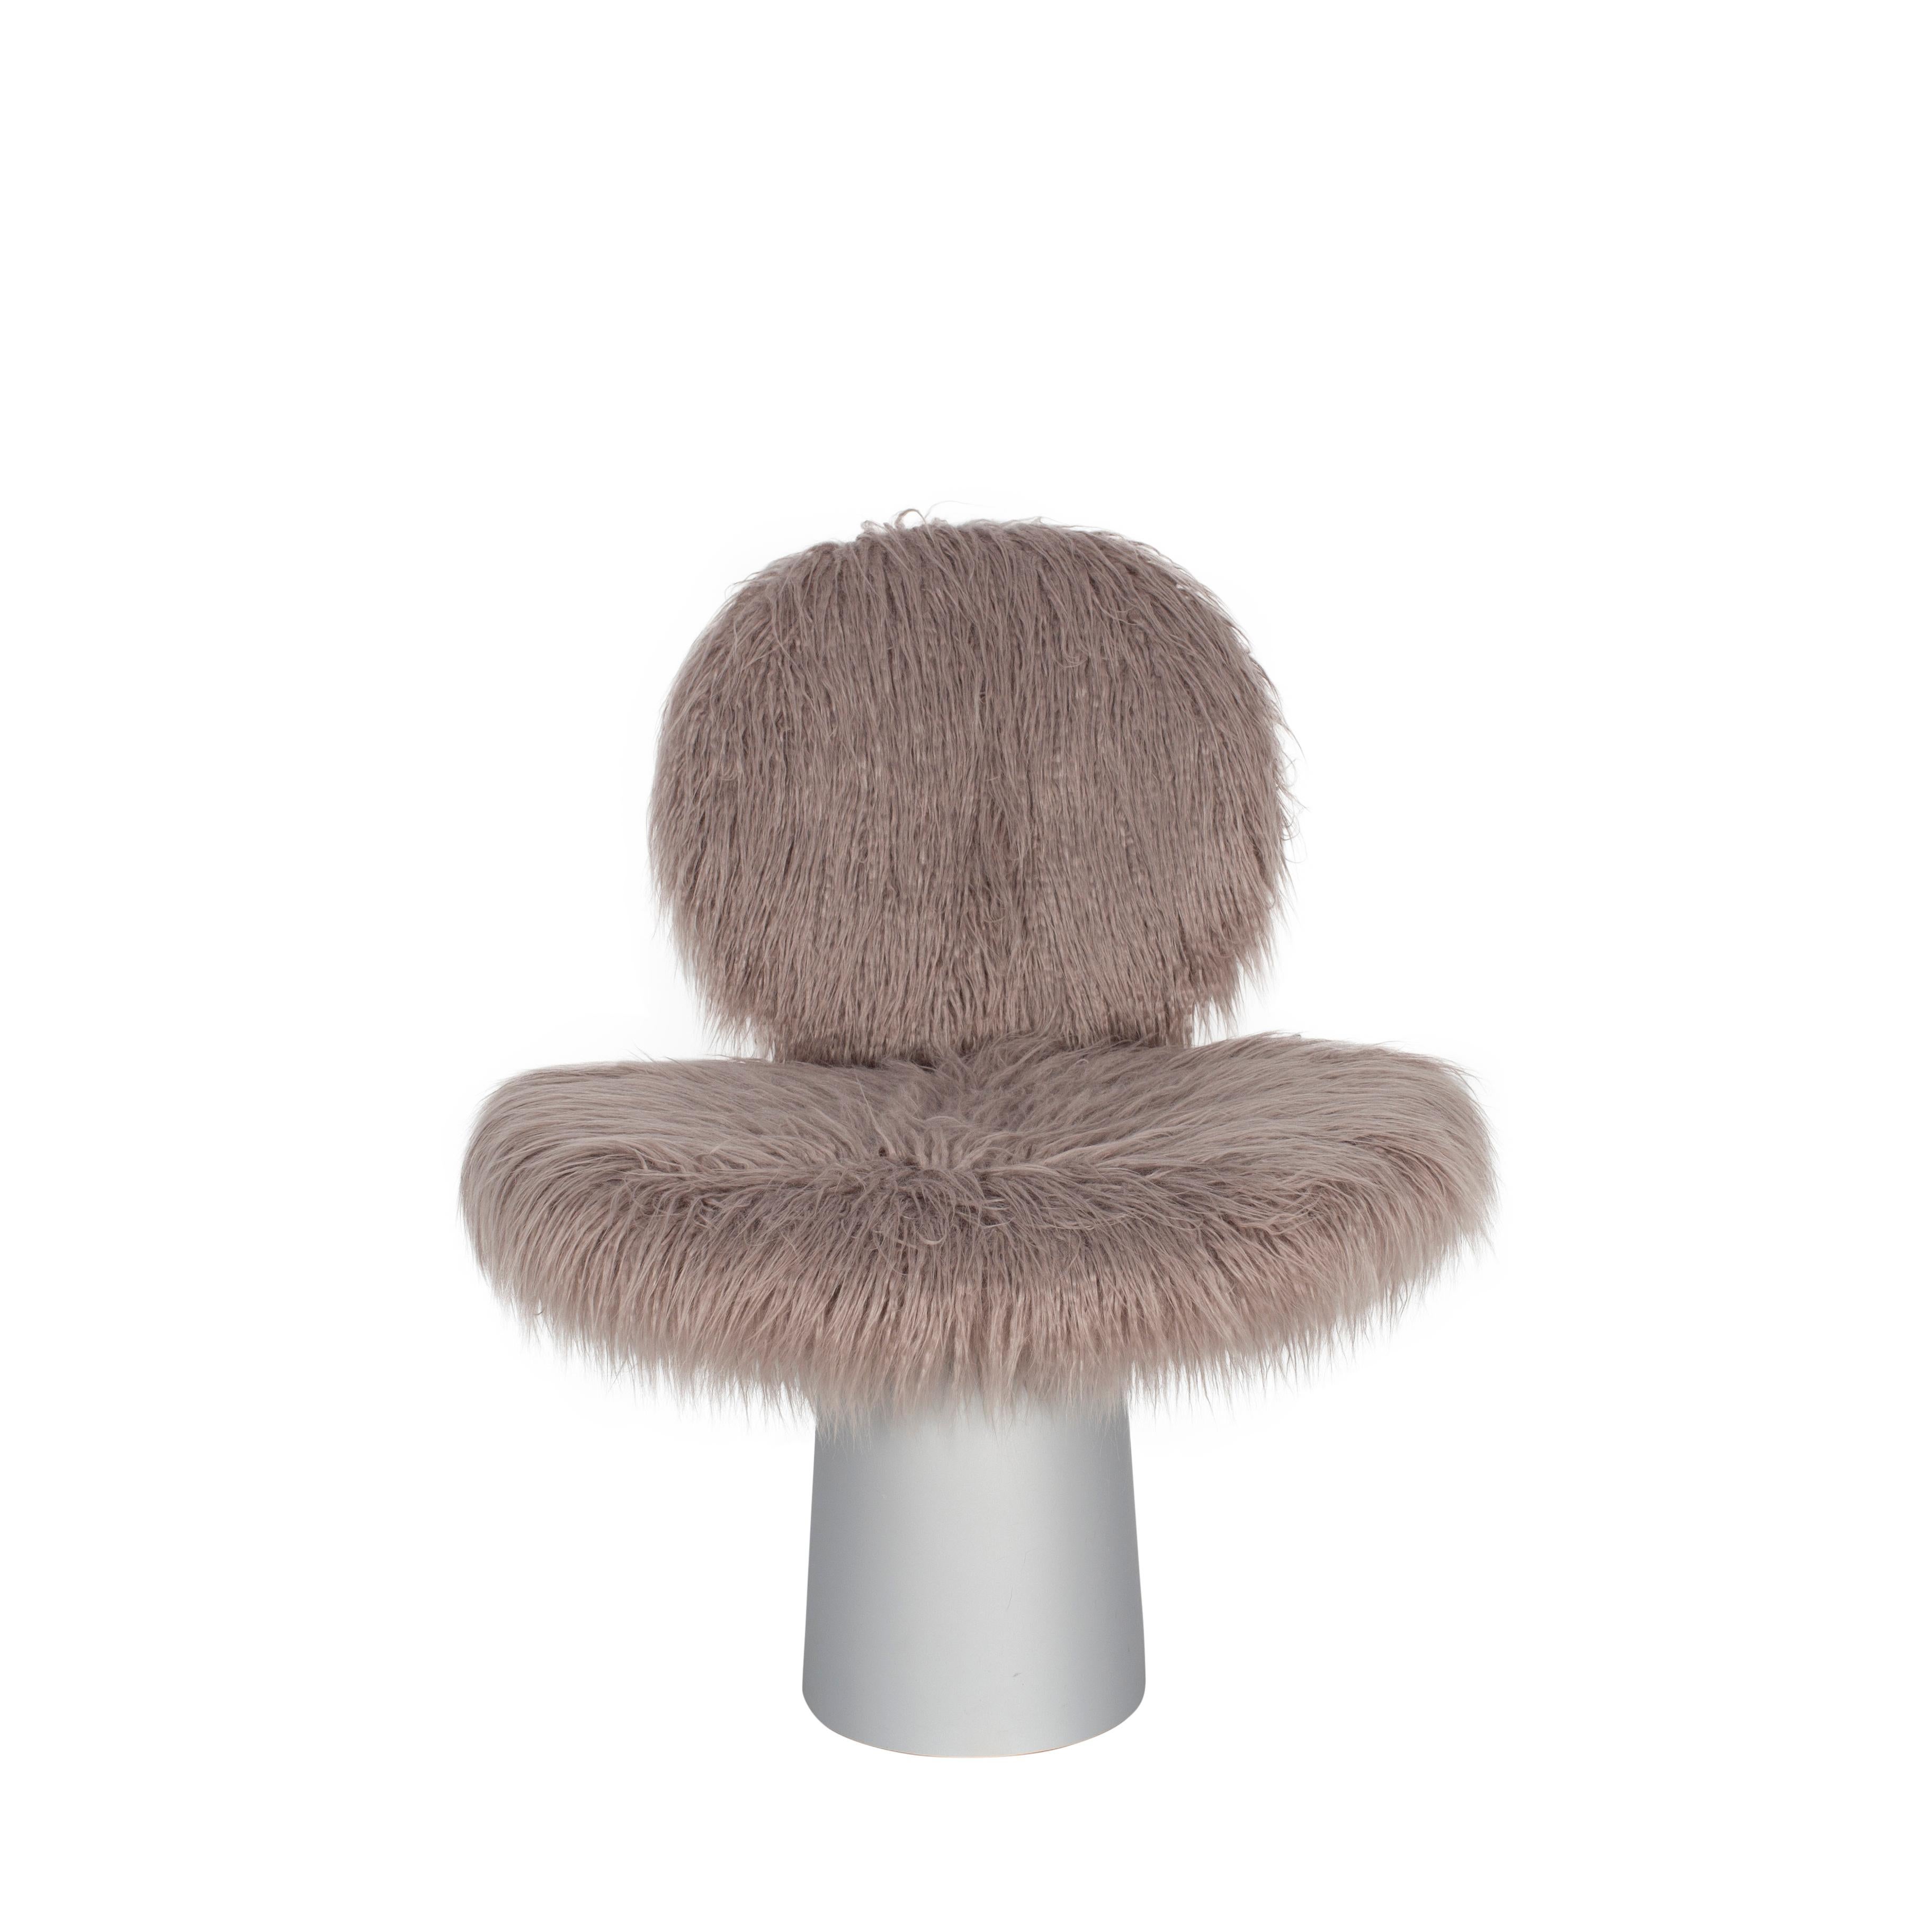 Pilota grey faux fur white aluminium lounge chair by Pulpo
Dimensions: D65 x W75 x H75 cm
Materials: leather, cord, faux fur, wool, powder coated metal

Also available in different colours and finishes.

Starting from a simple construction,